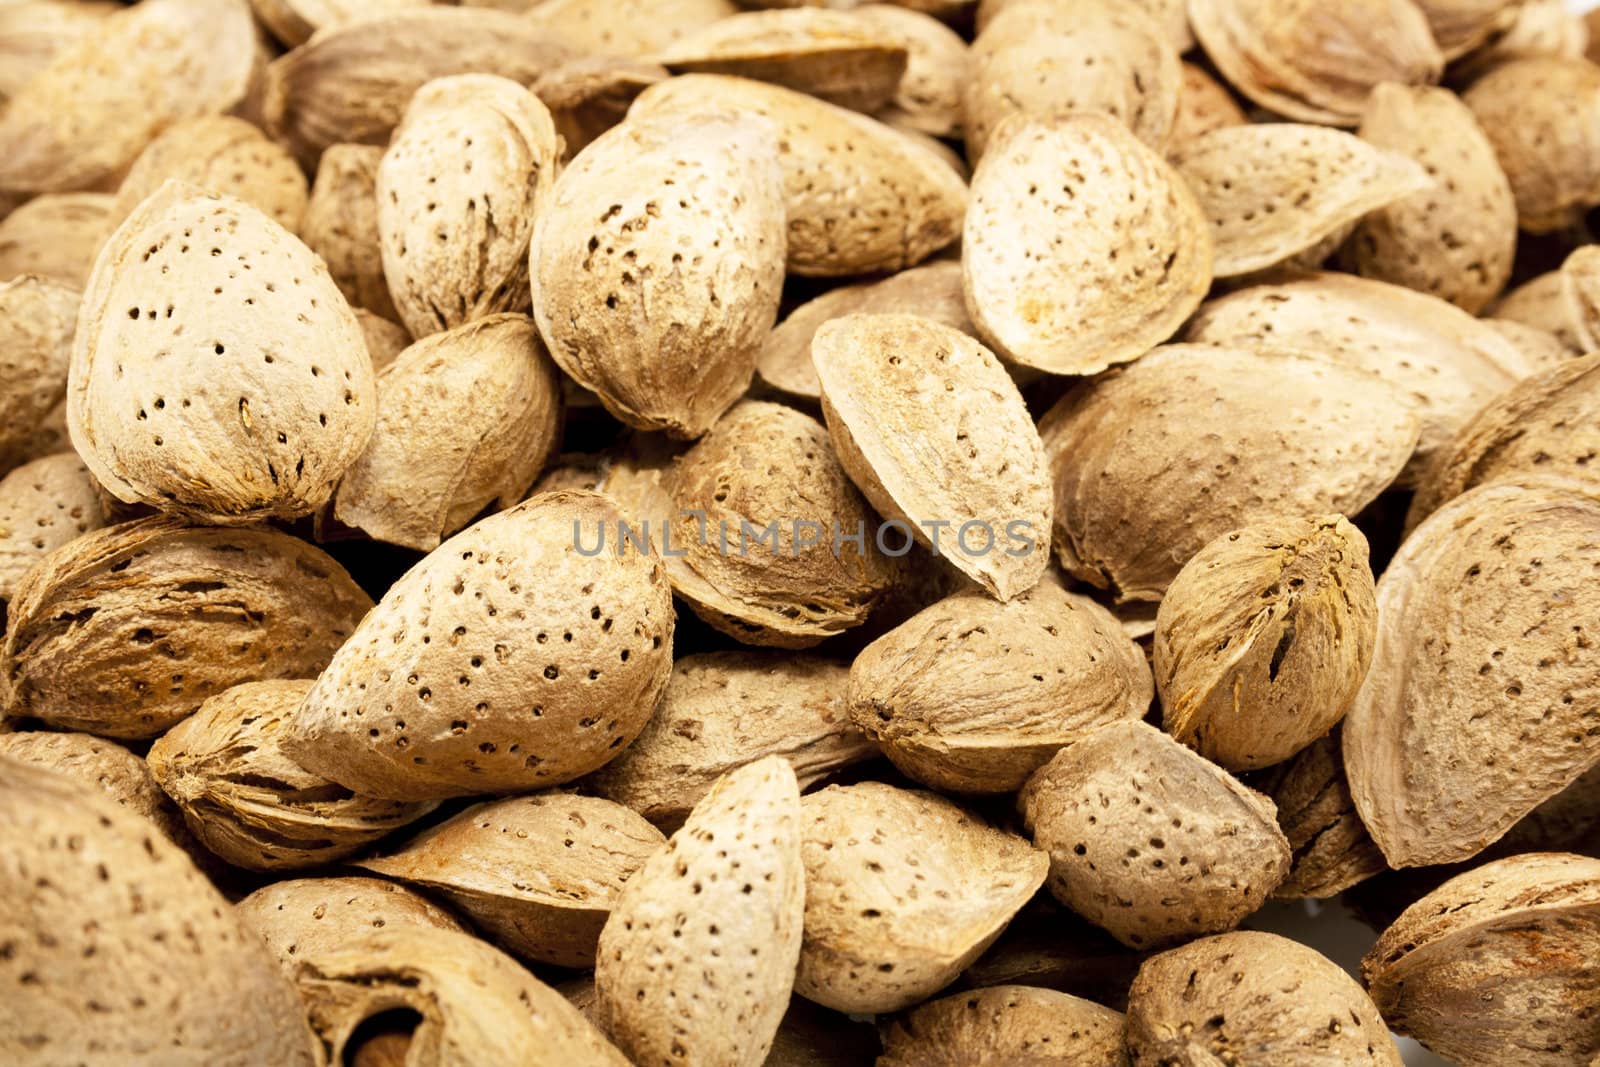 Close up image of almonds